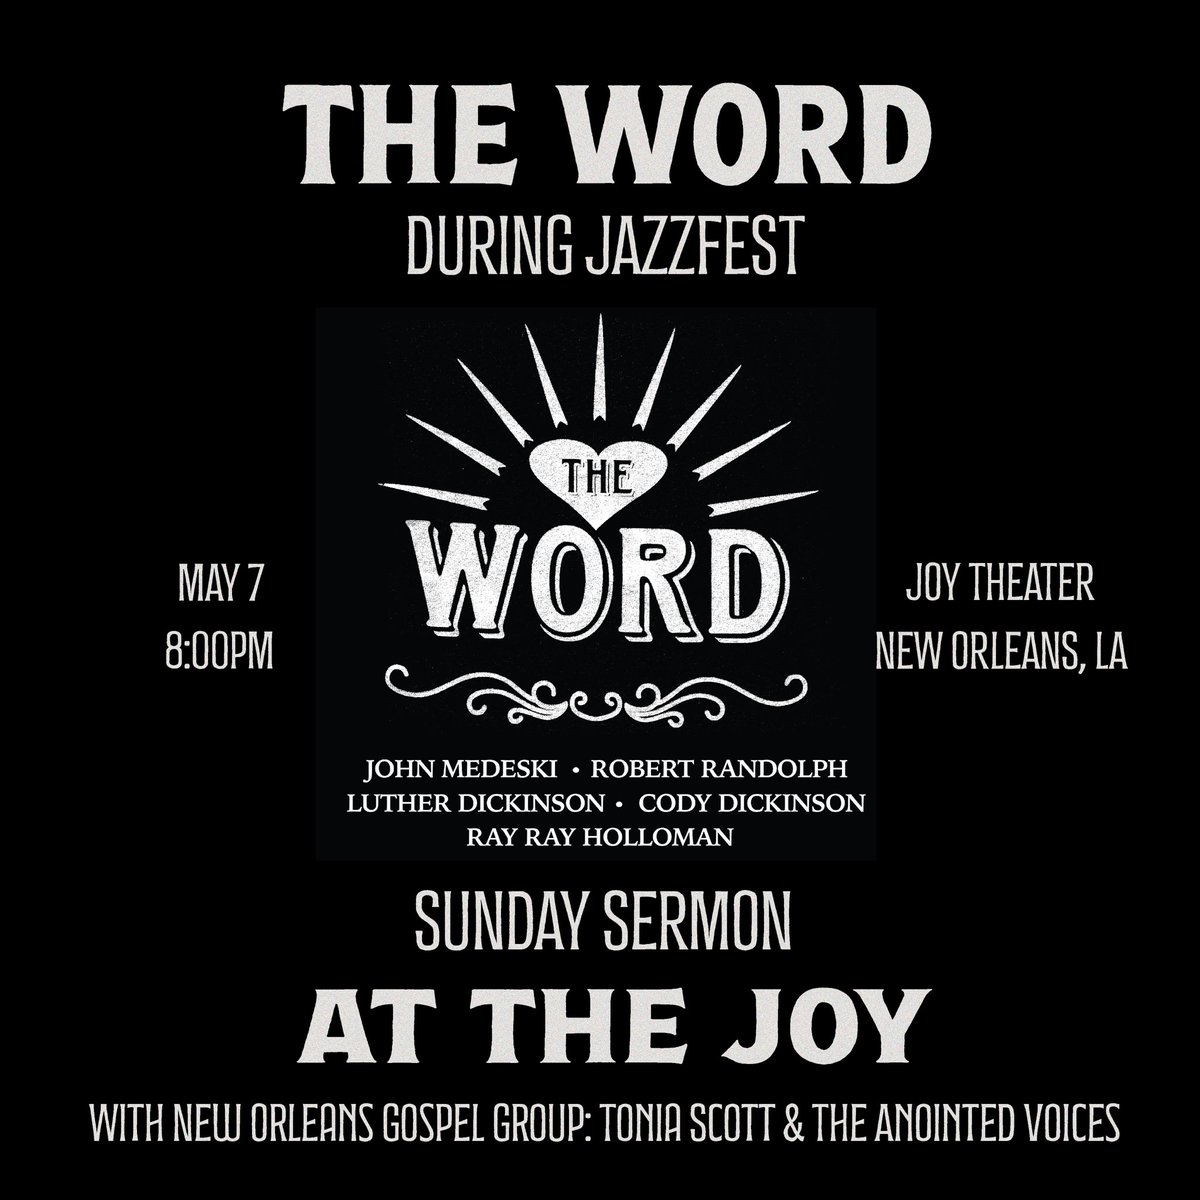 The Word! Sunday night at @JoyTheater in New Orleans! Tickets on-sale now at thejoytheater.com/event/the-word/